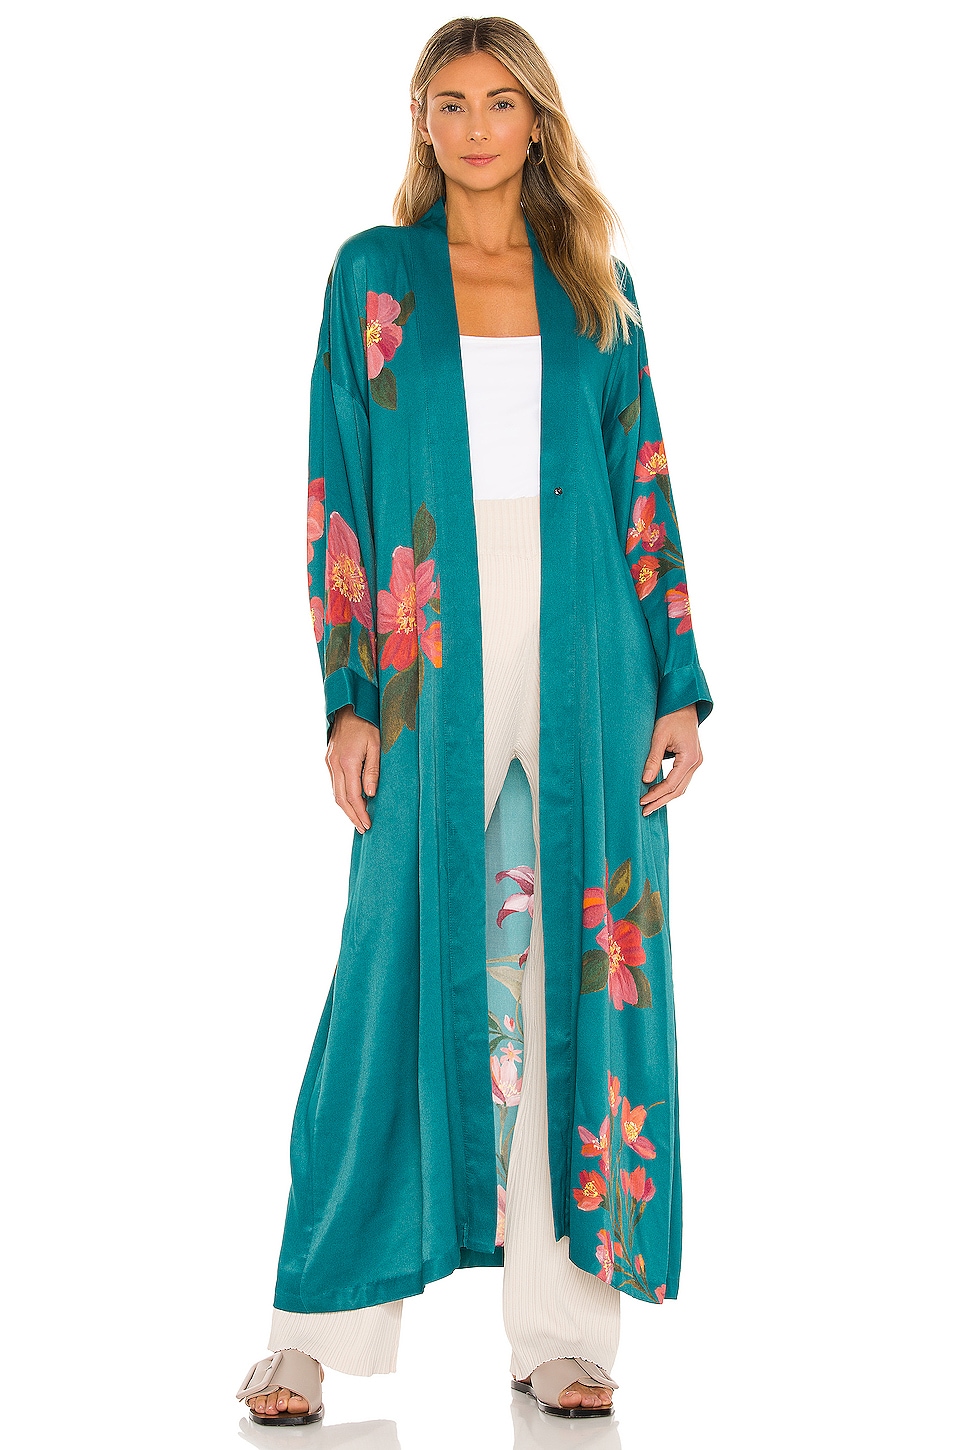 House Of Harlow 1960 X Revolve Maxi Robe With Fringe In Dark Teal Floral